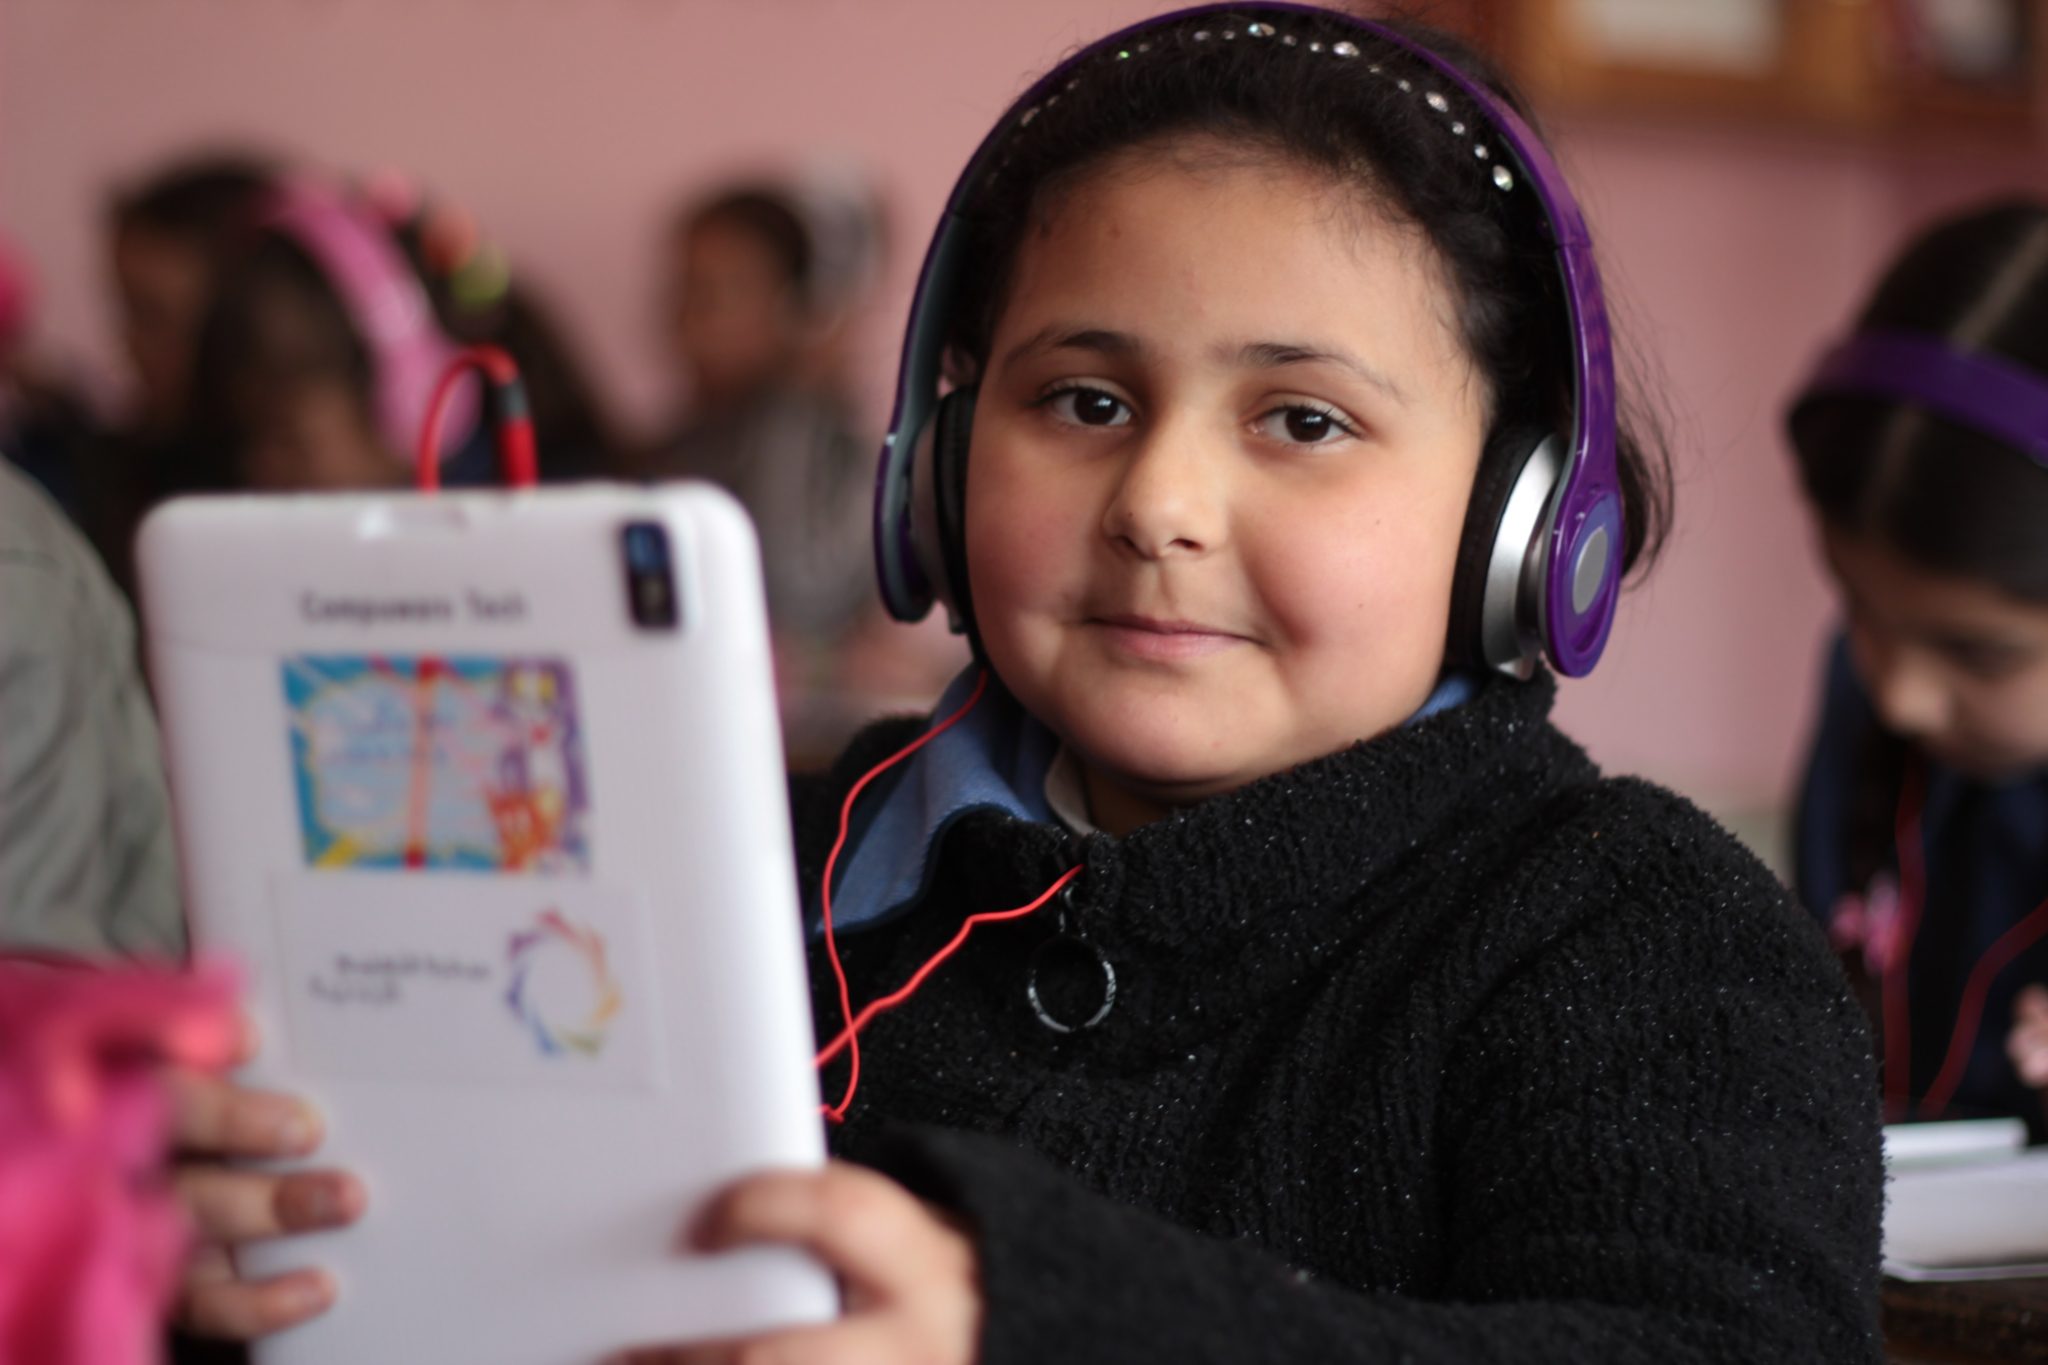 A girl with headphones and holding a table smiles at the camera